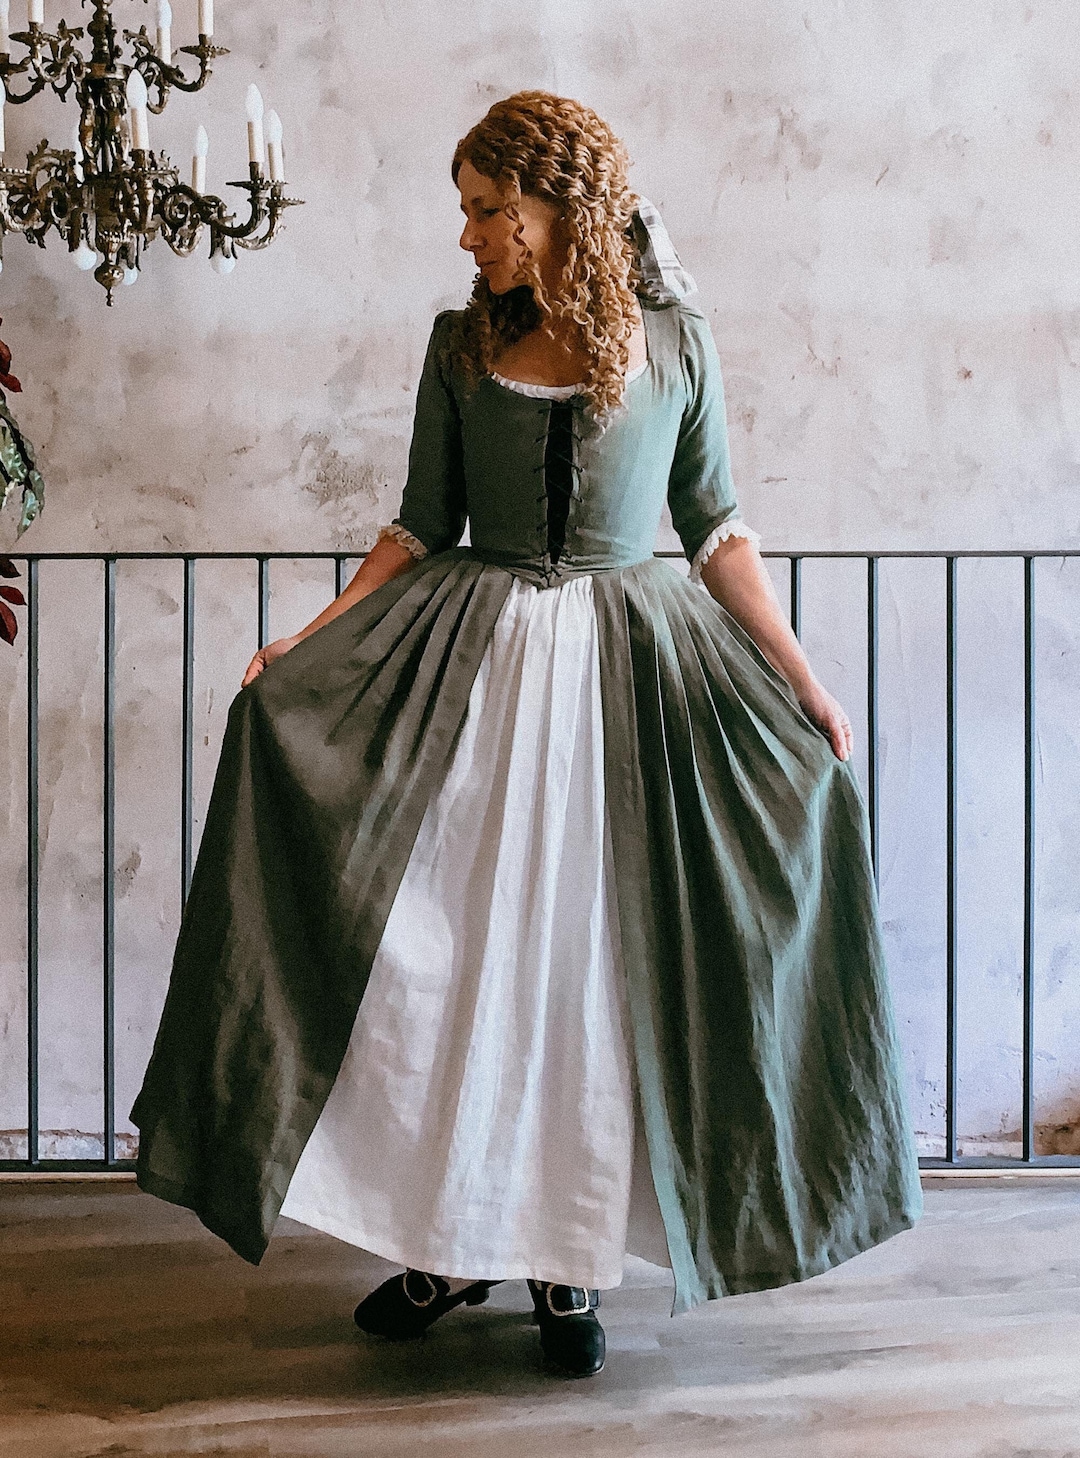 Woman's Evening Ensemble: Dress, Overdress, Bustle, and Petticoat